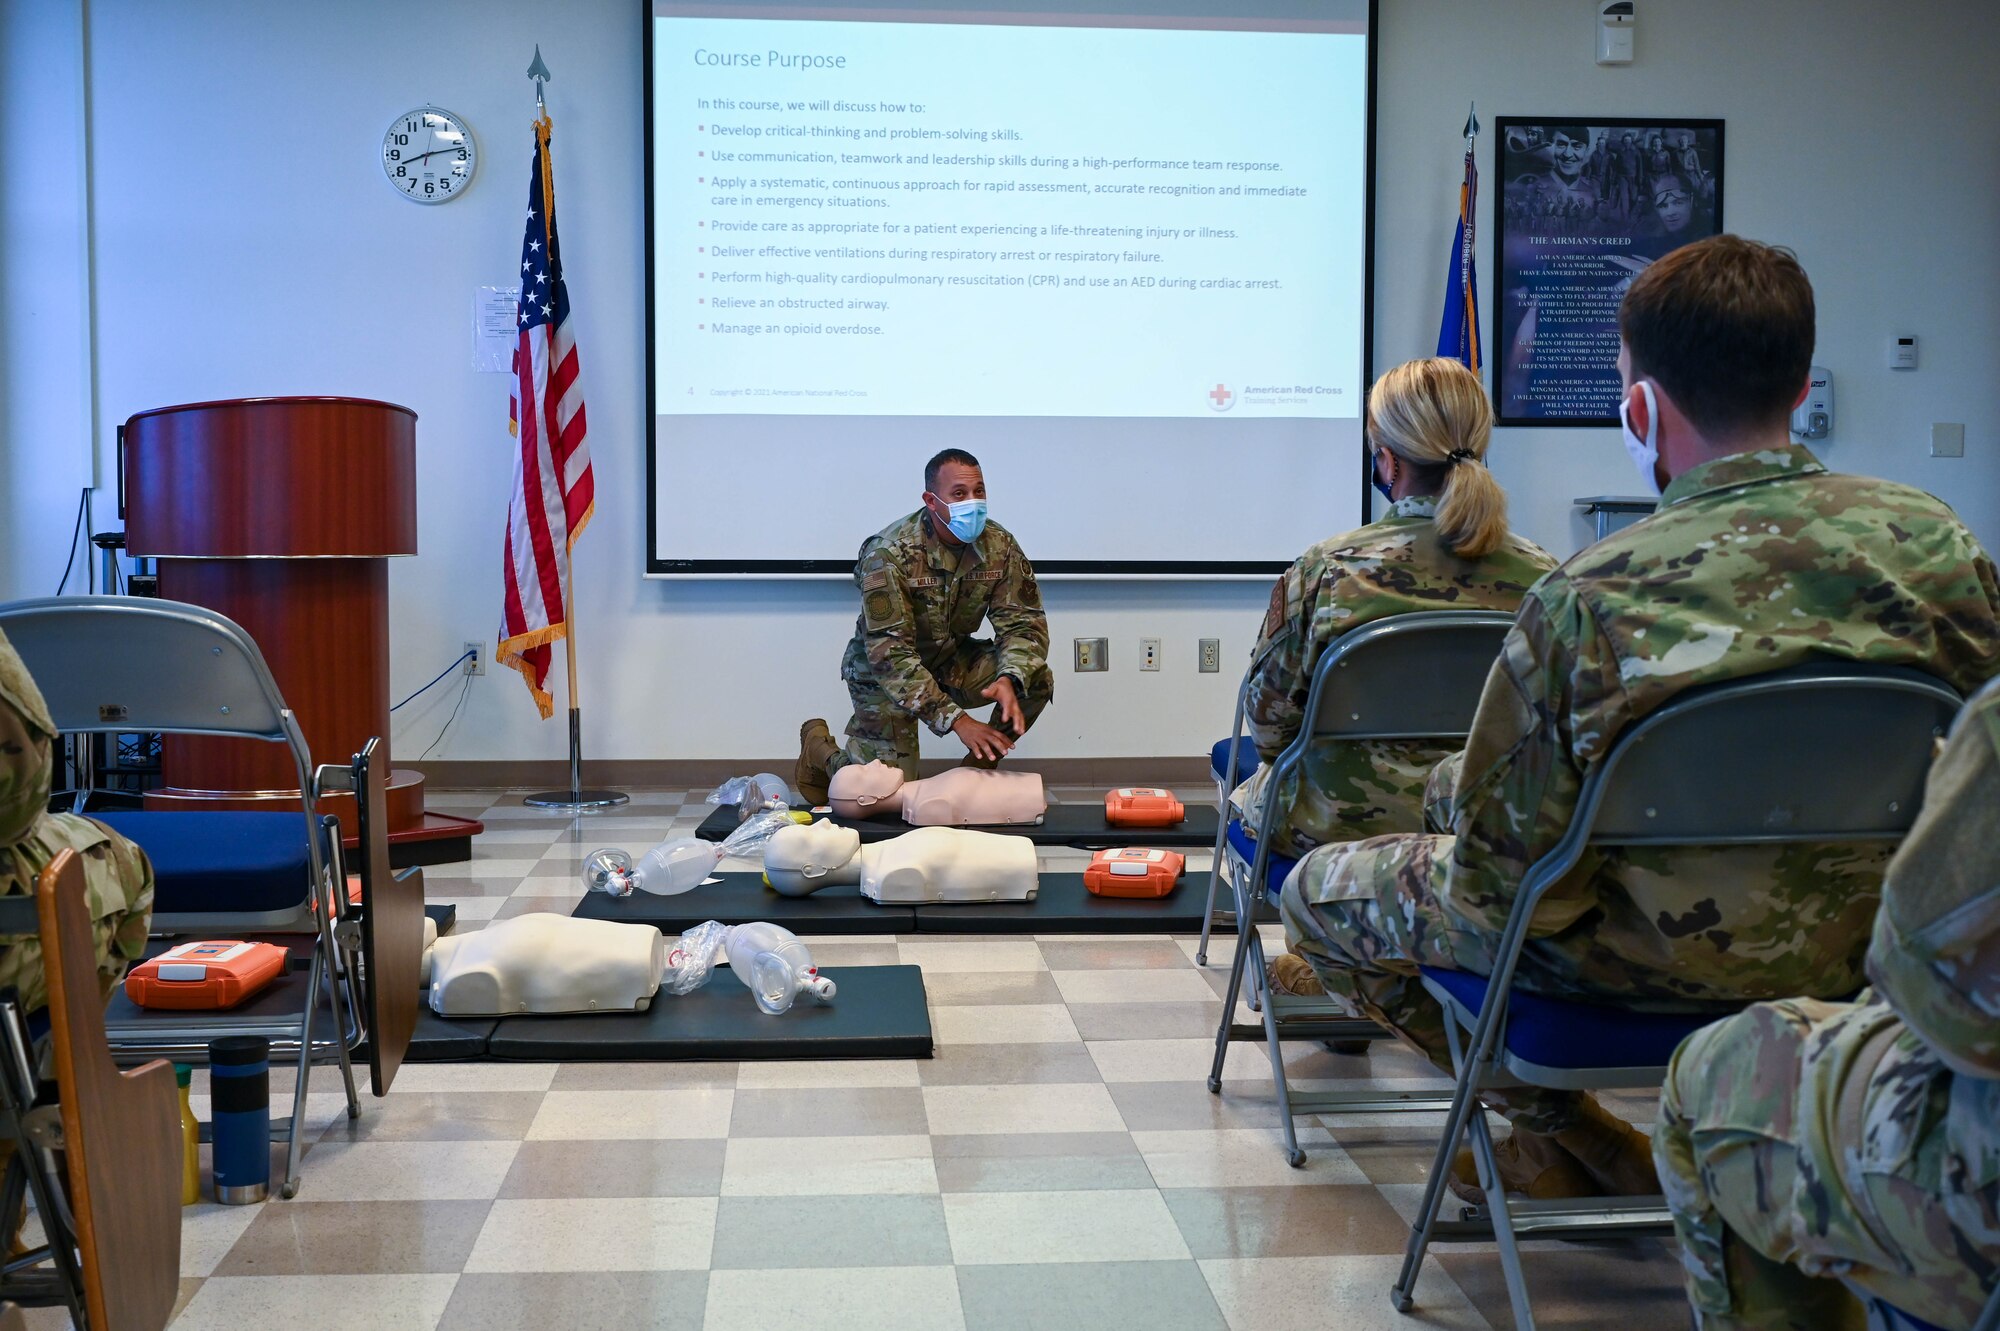 a man demonstrates CPR